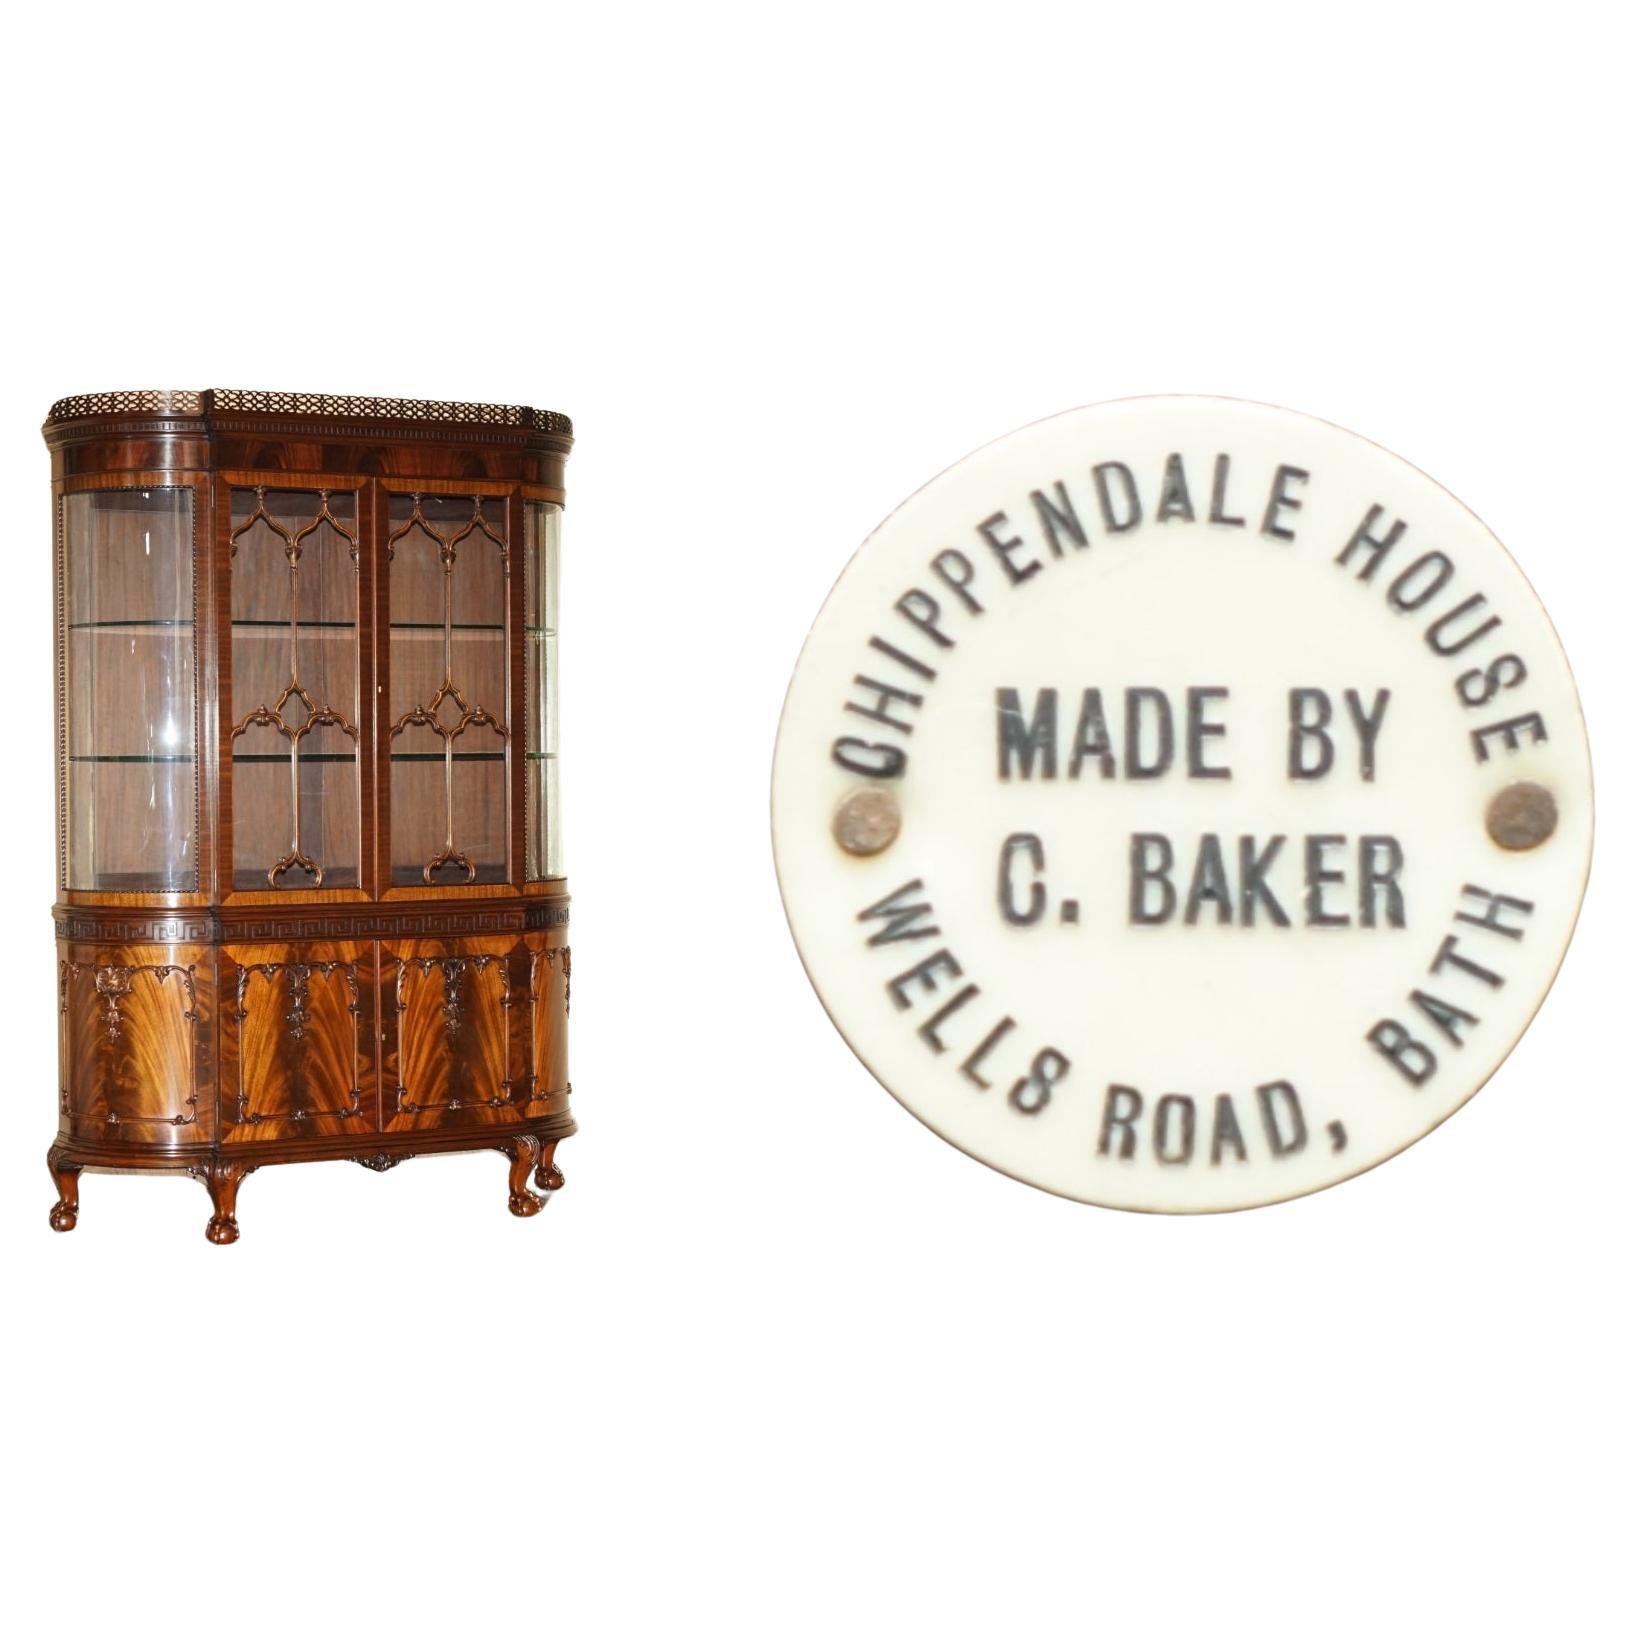 EXQUISITÉ CHARLES BAKER OF CHIPPENDALE HOUSE STAMPED DISPLAY CABINET en vente